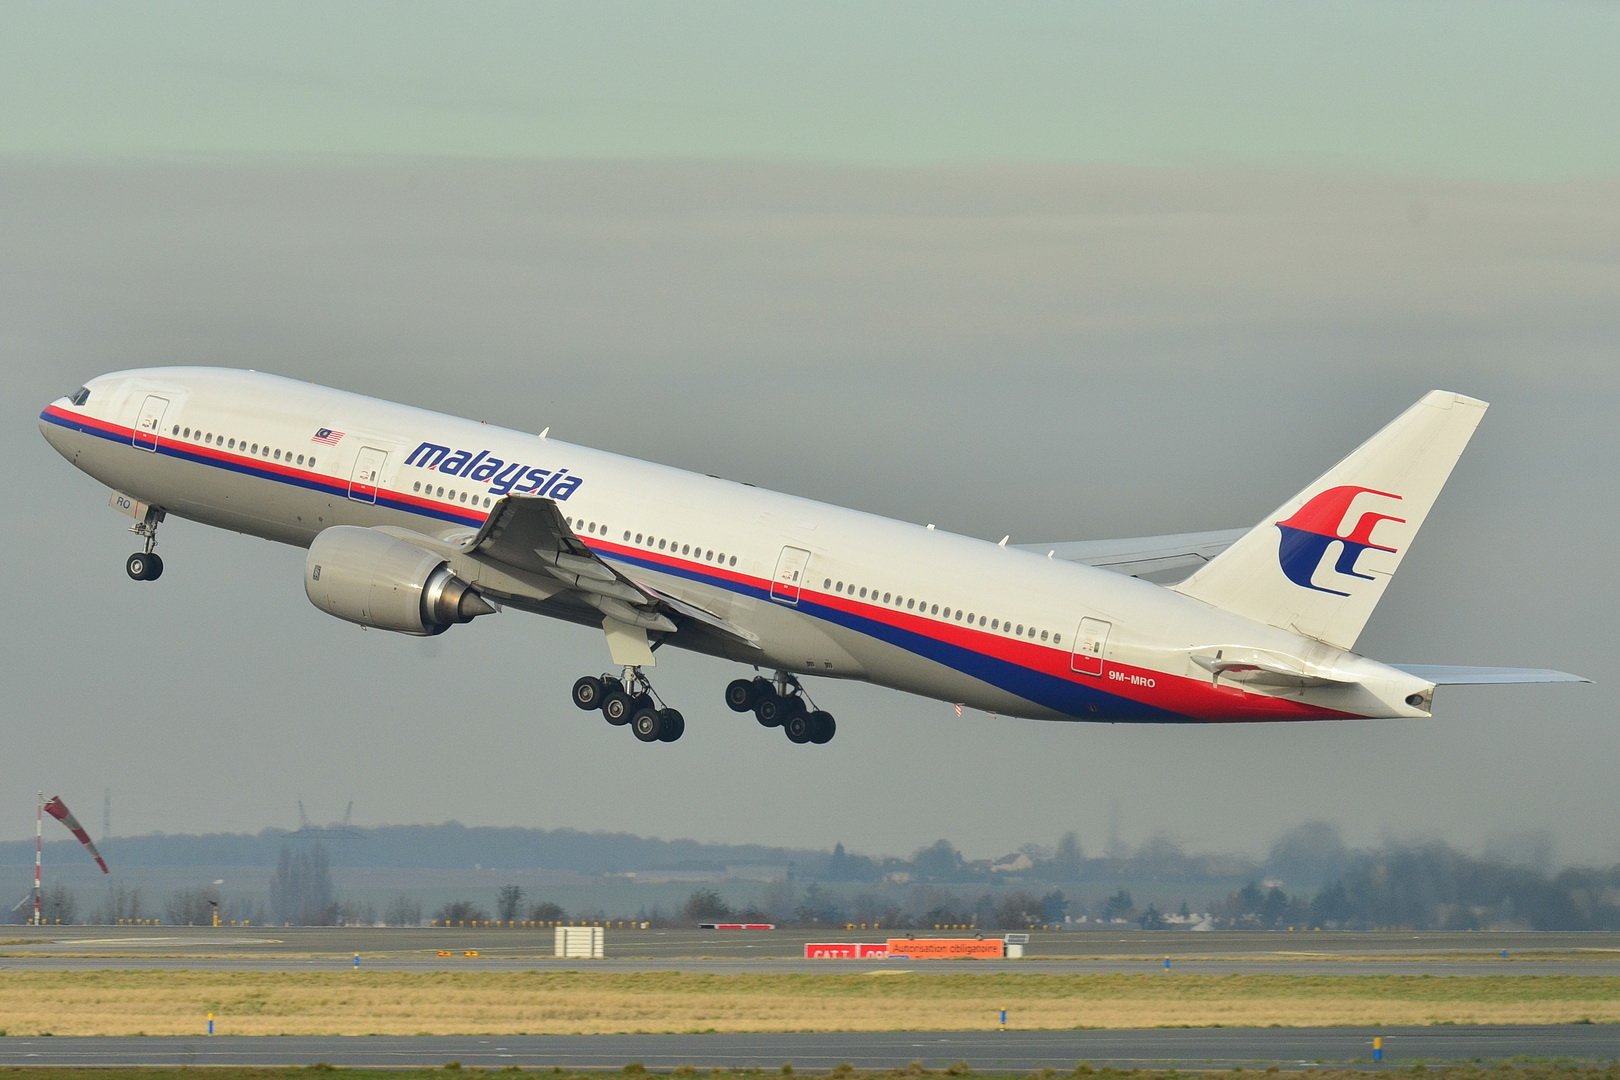 Malaysian Airlines Flight MH370